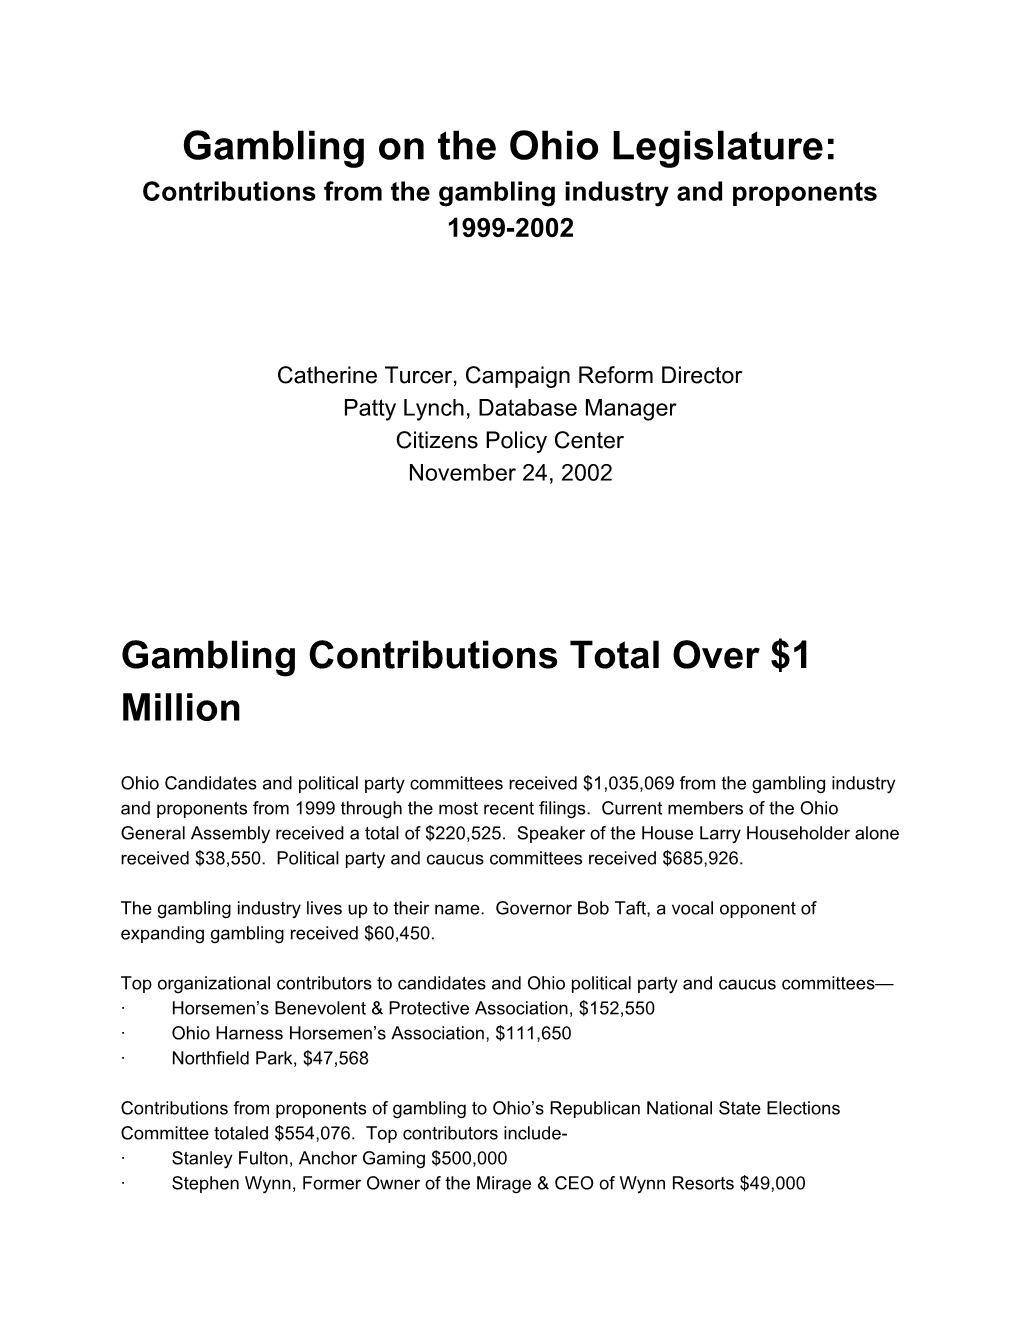 Gambling on the Ohio Legislature: Contributions from the Gambling Industry and Proponents 1999-2002